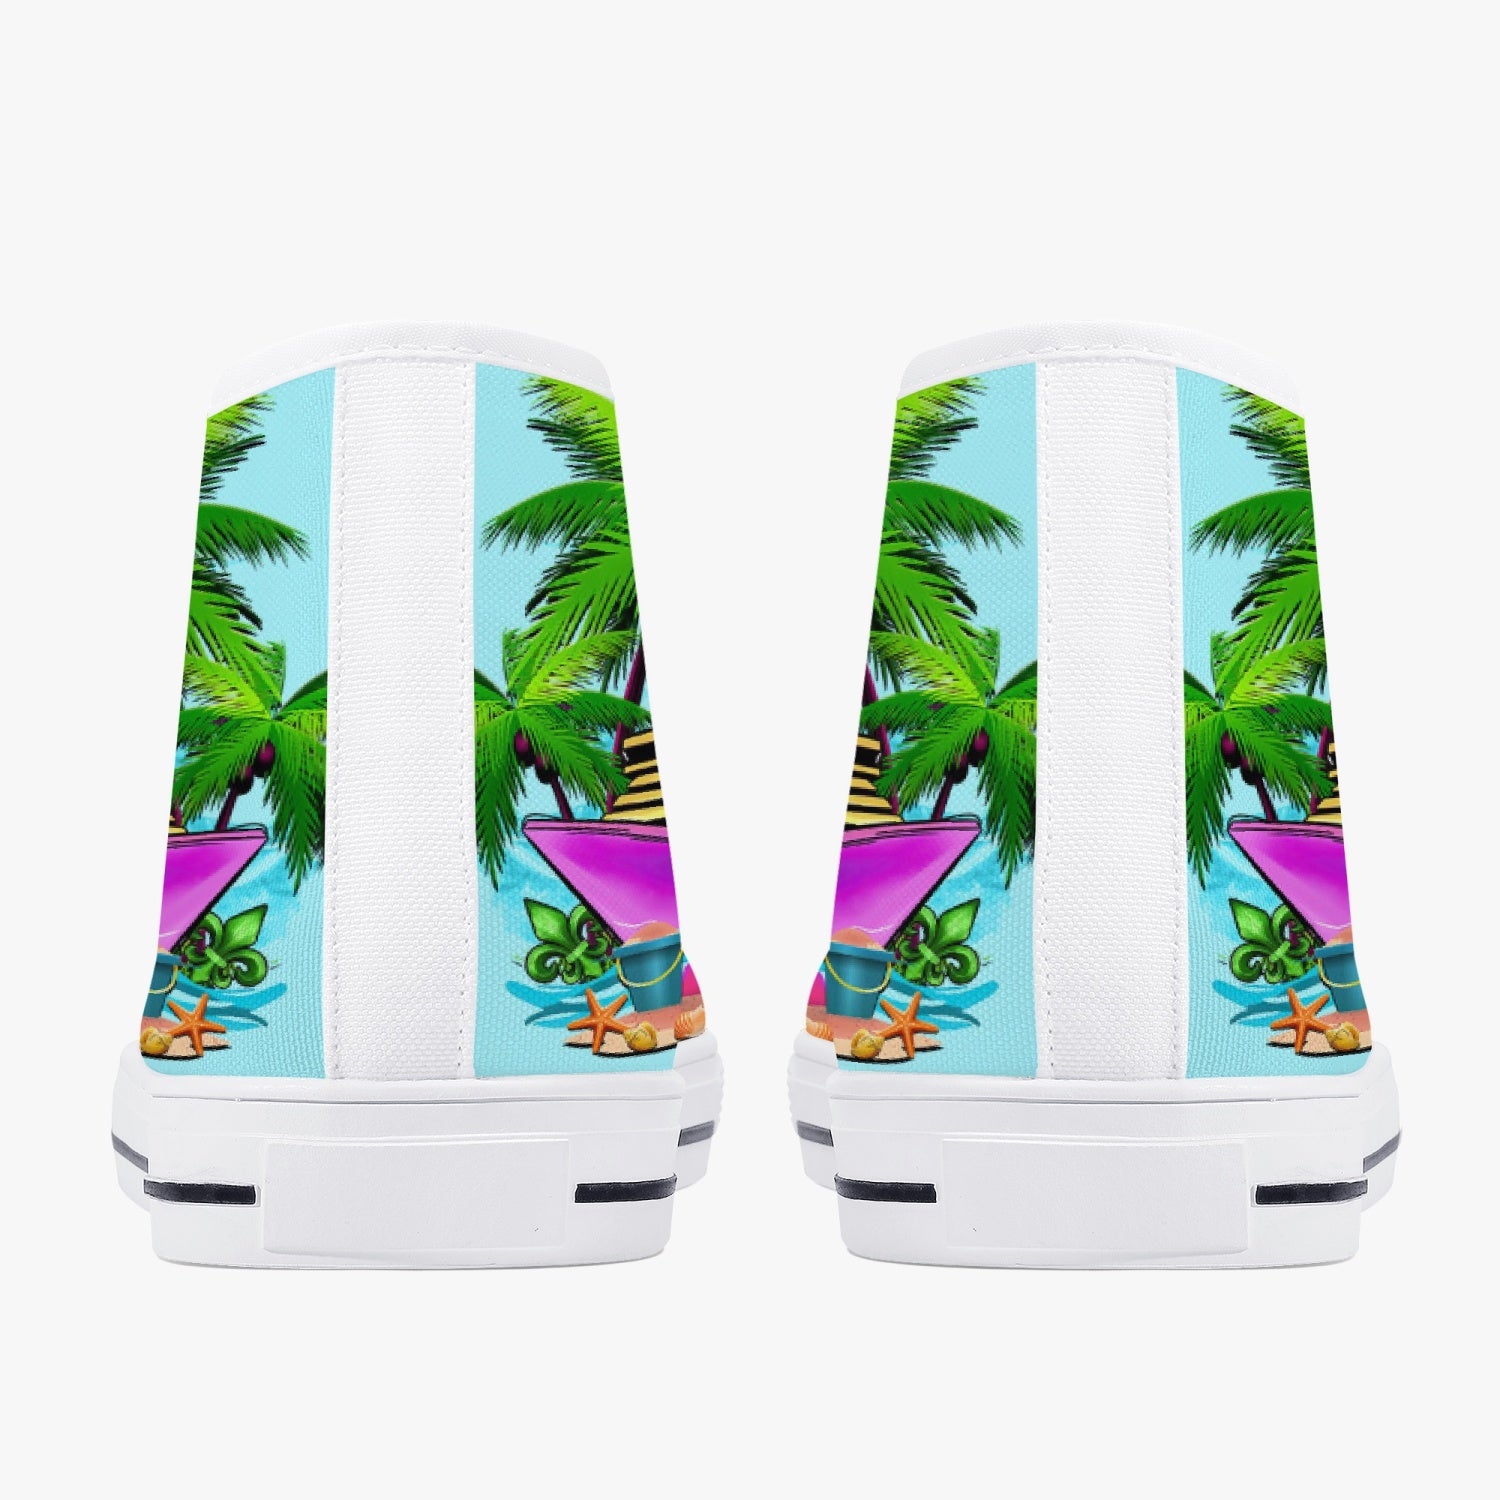 CRUISE SQUAD HIGH TOP CANVAS SHOES - TLTR0607232